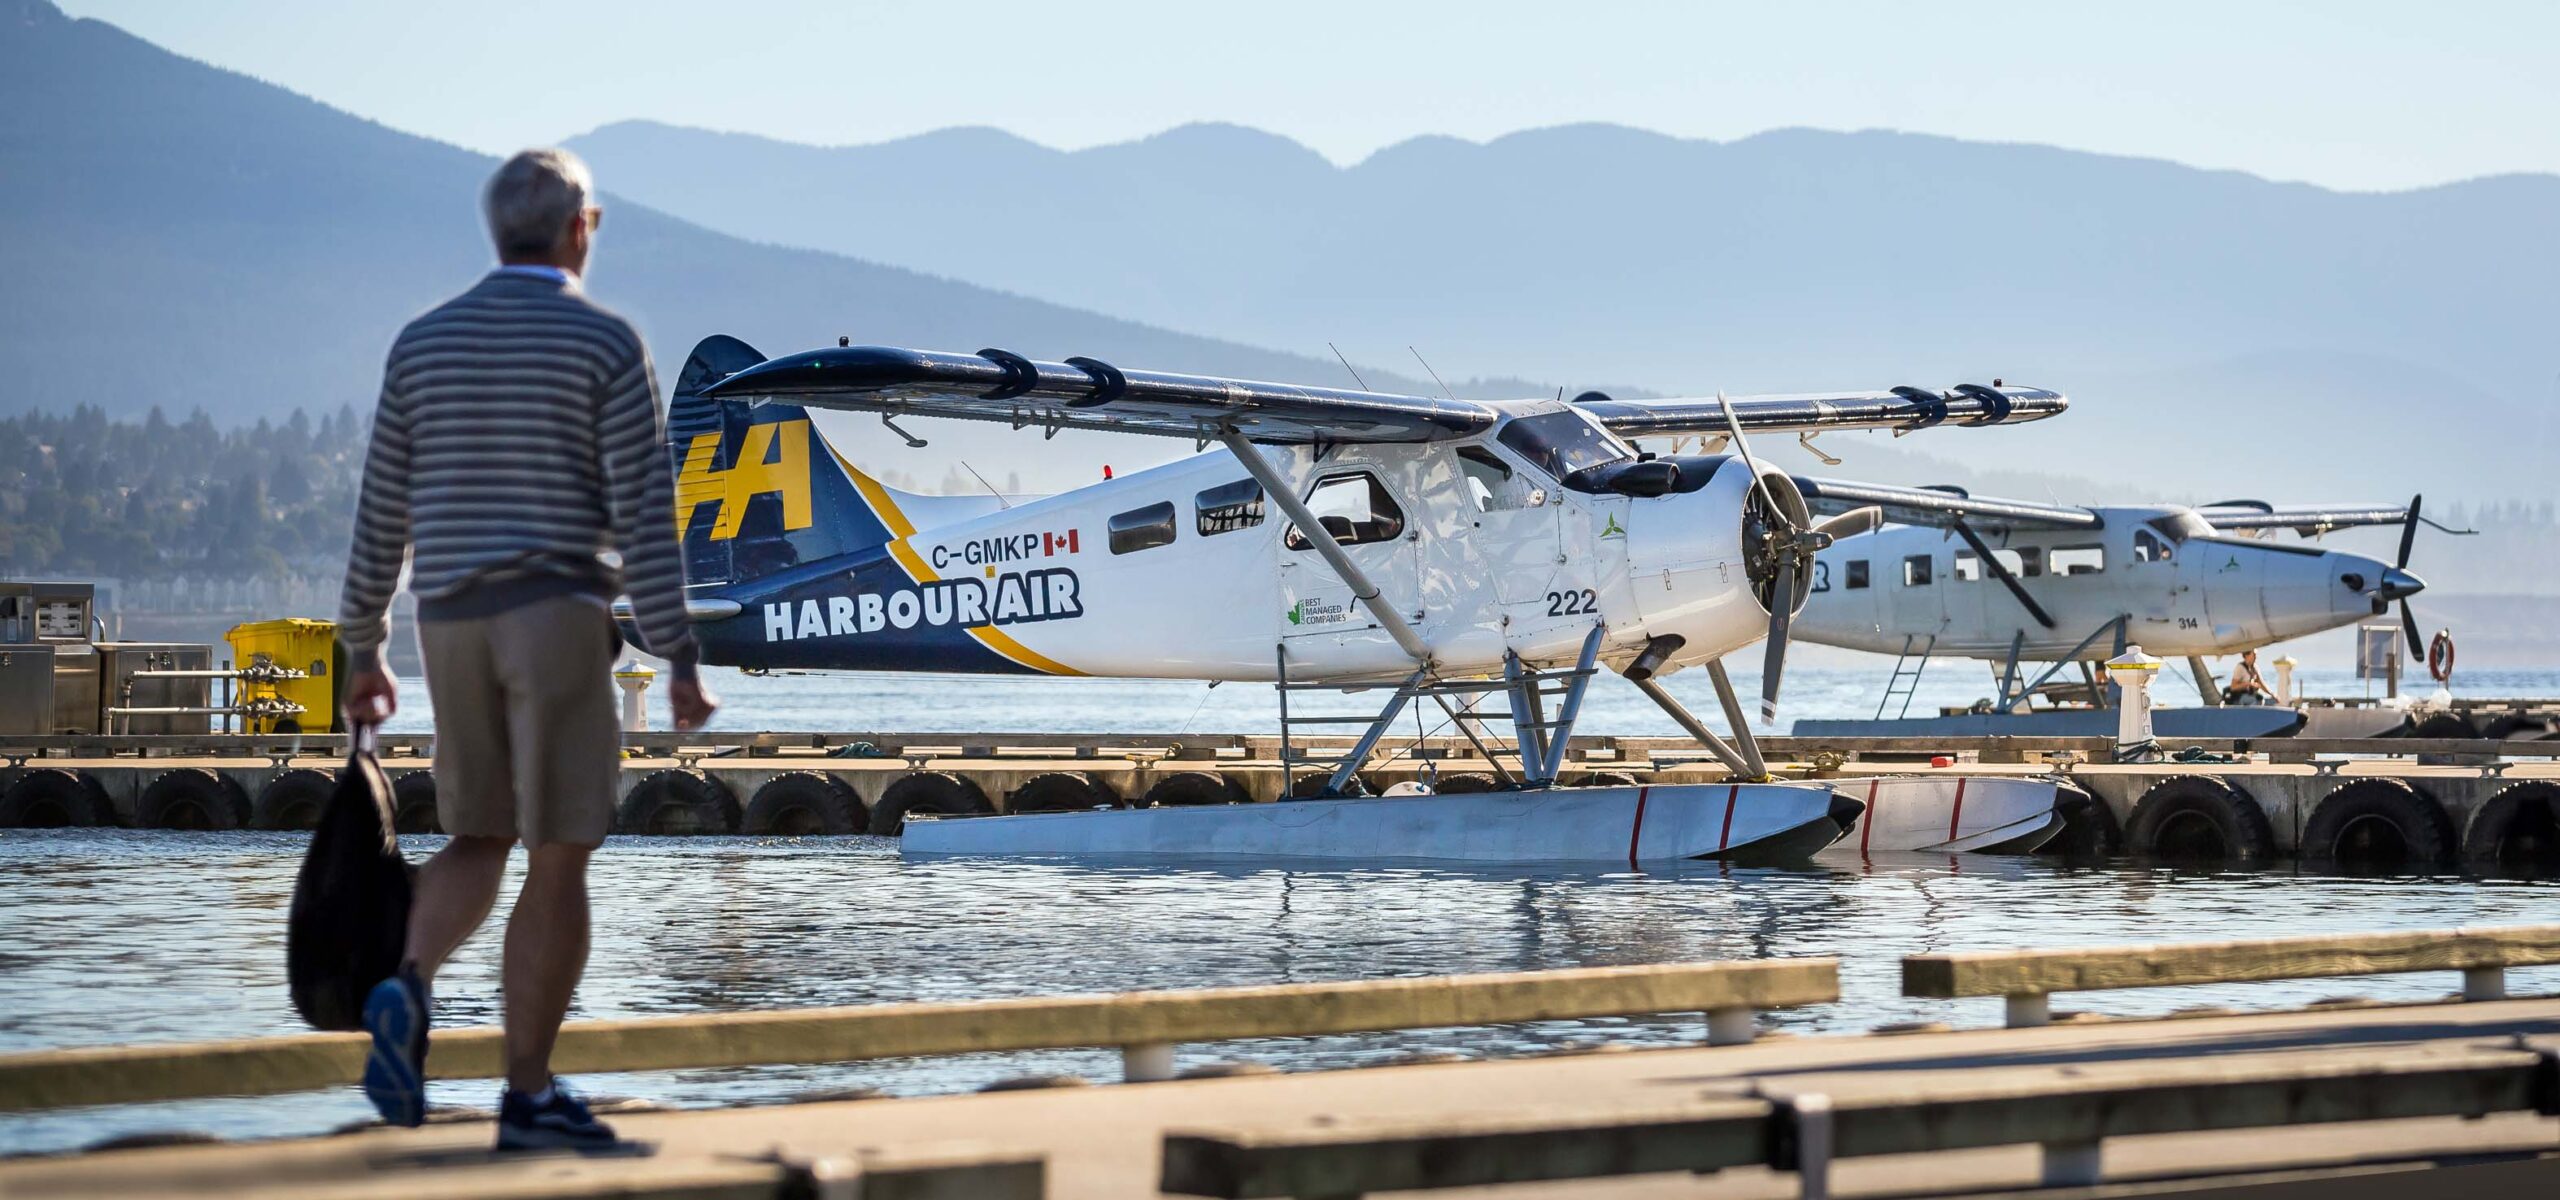 Man walking on a pier to board a seaplane moored on a lake.